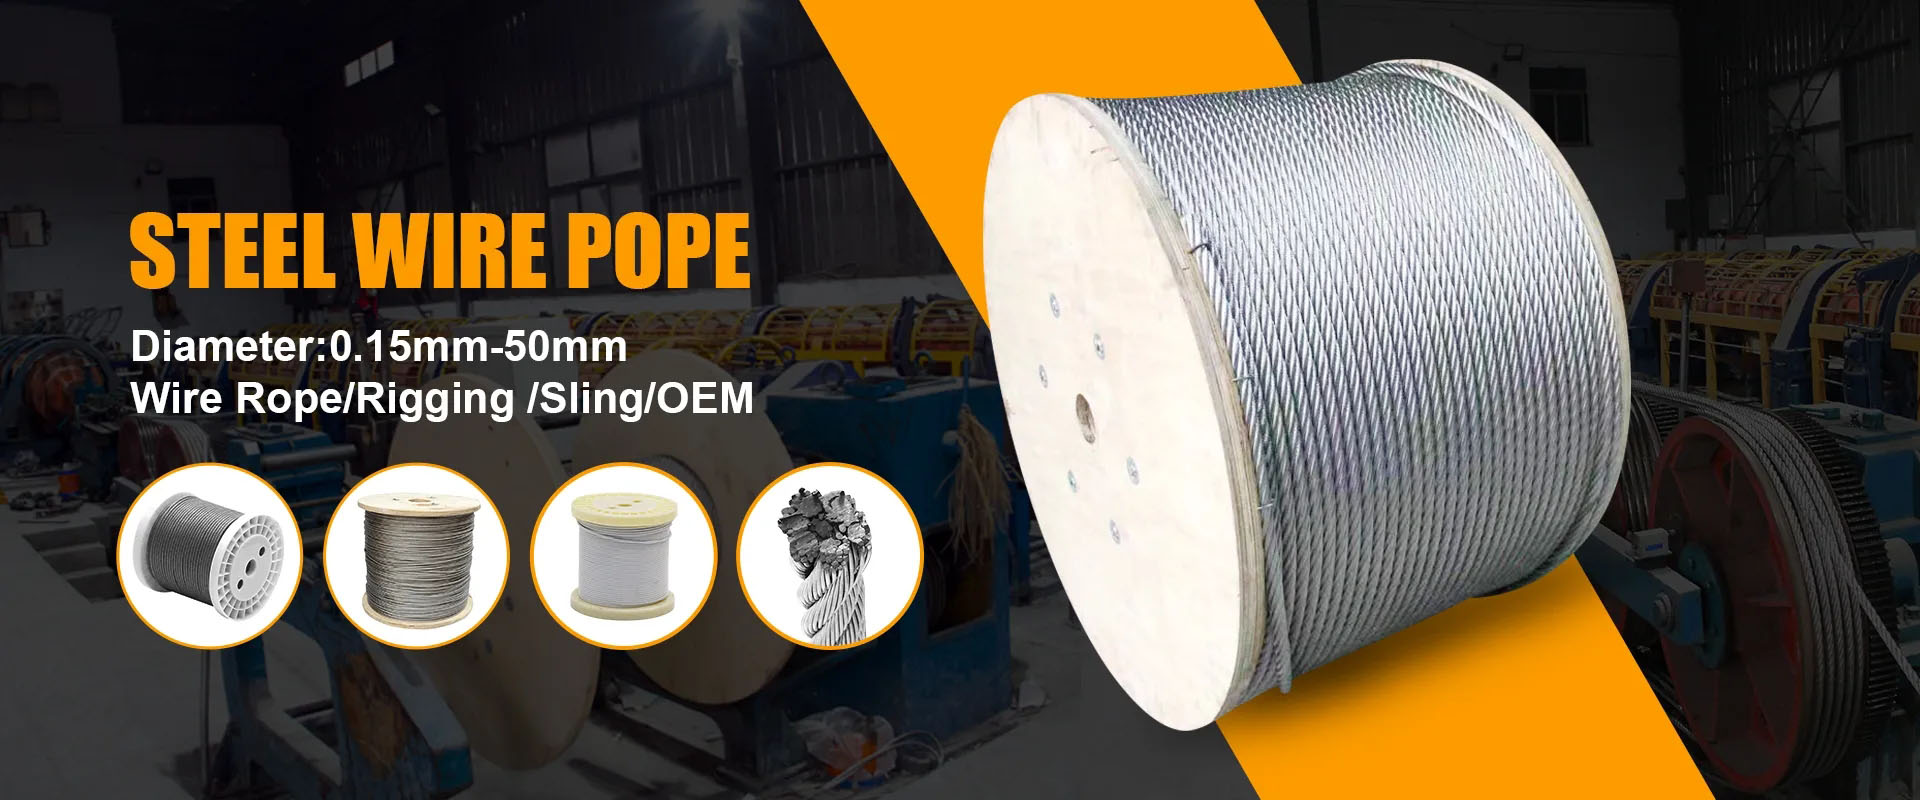 QINGDAO RIGI RIGGING CO.,LTD - RIGGING HARDWARE，WIRE ROPE CLIP  ,TURNBUCKLE,SHACKLE,HOOKS,SNAP HOOKS,TAKE UP(WIRE TENDER),THIMBLE,EYE  BOLTS&EYE NUT,ALUMIUM ALLOY SLEEVE,G80 PRODUCTS,LINK CHIN,LIFTING